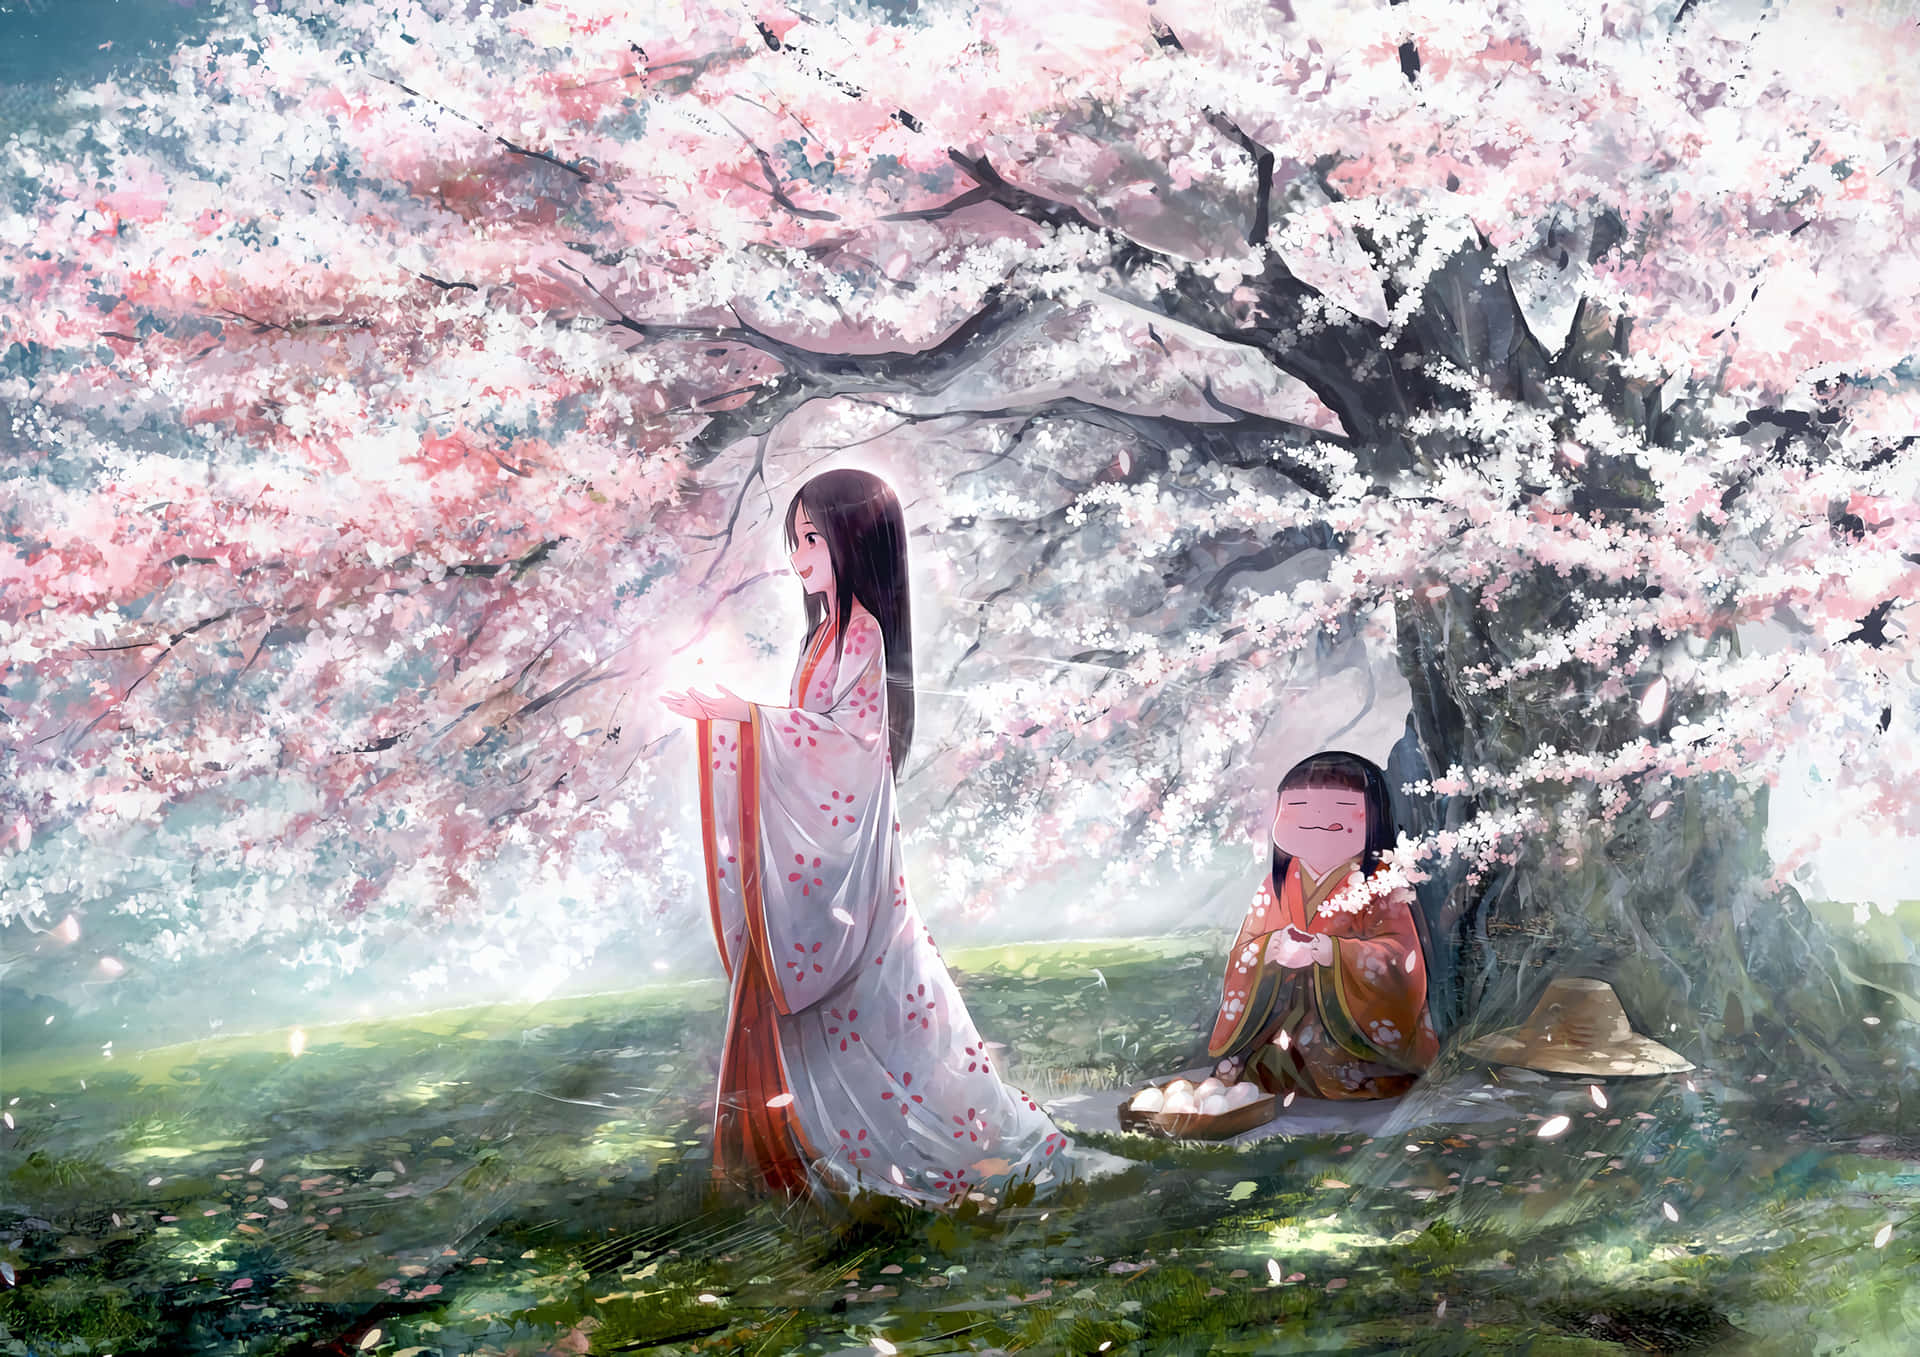 The Tale Of The Princess Kaguya - A Scene from the Magical Animation Film Wallpaper